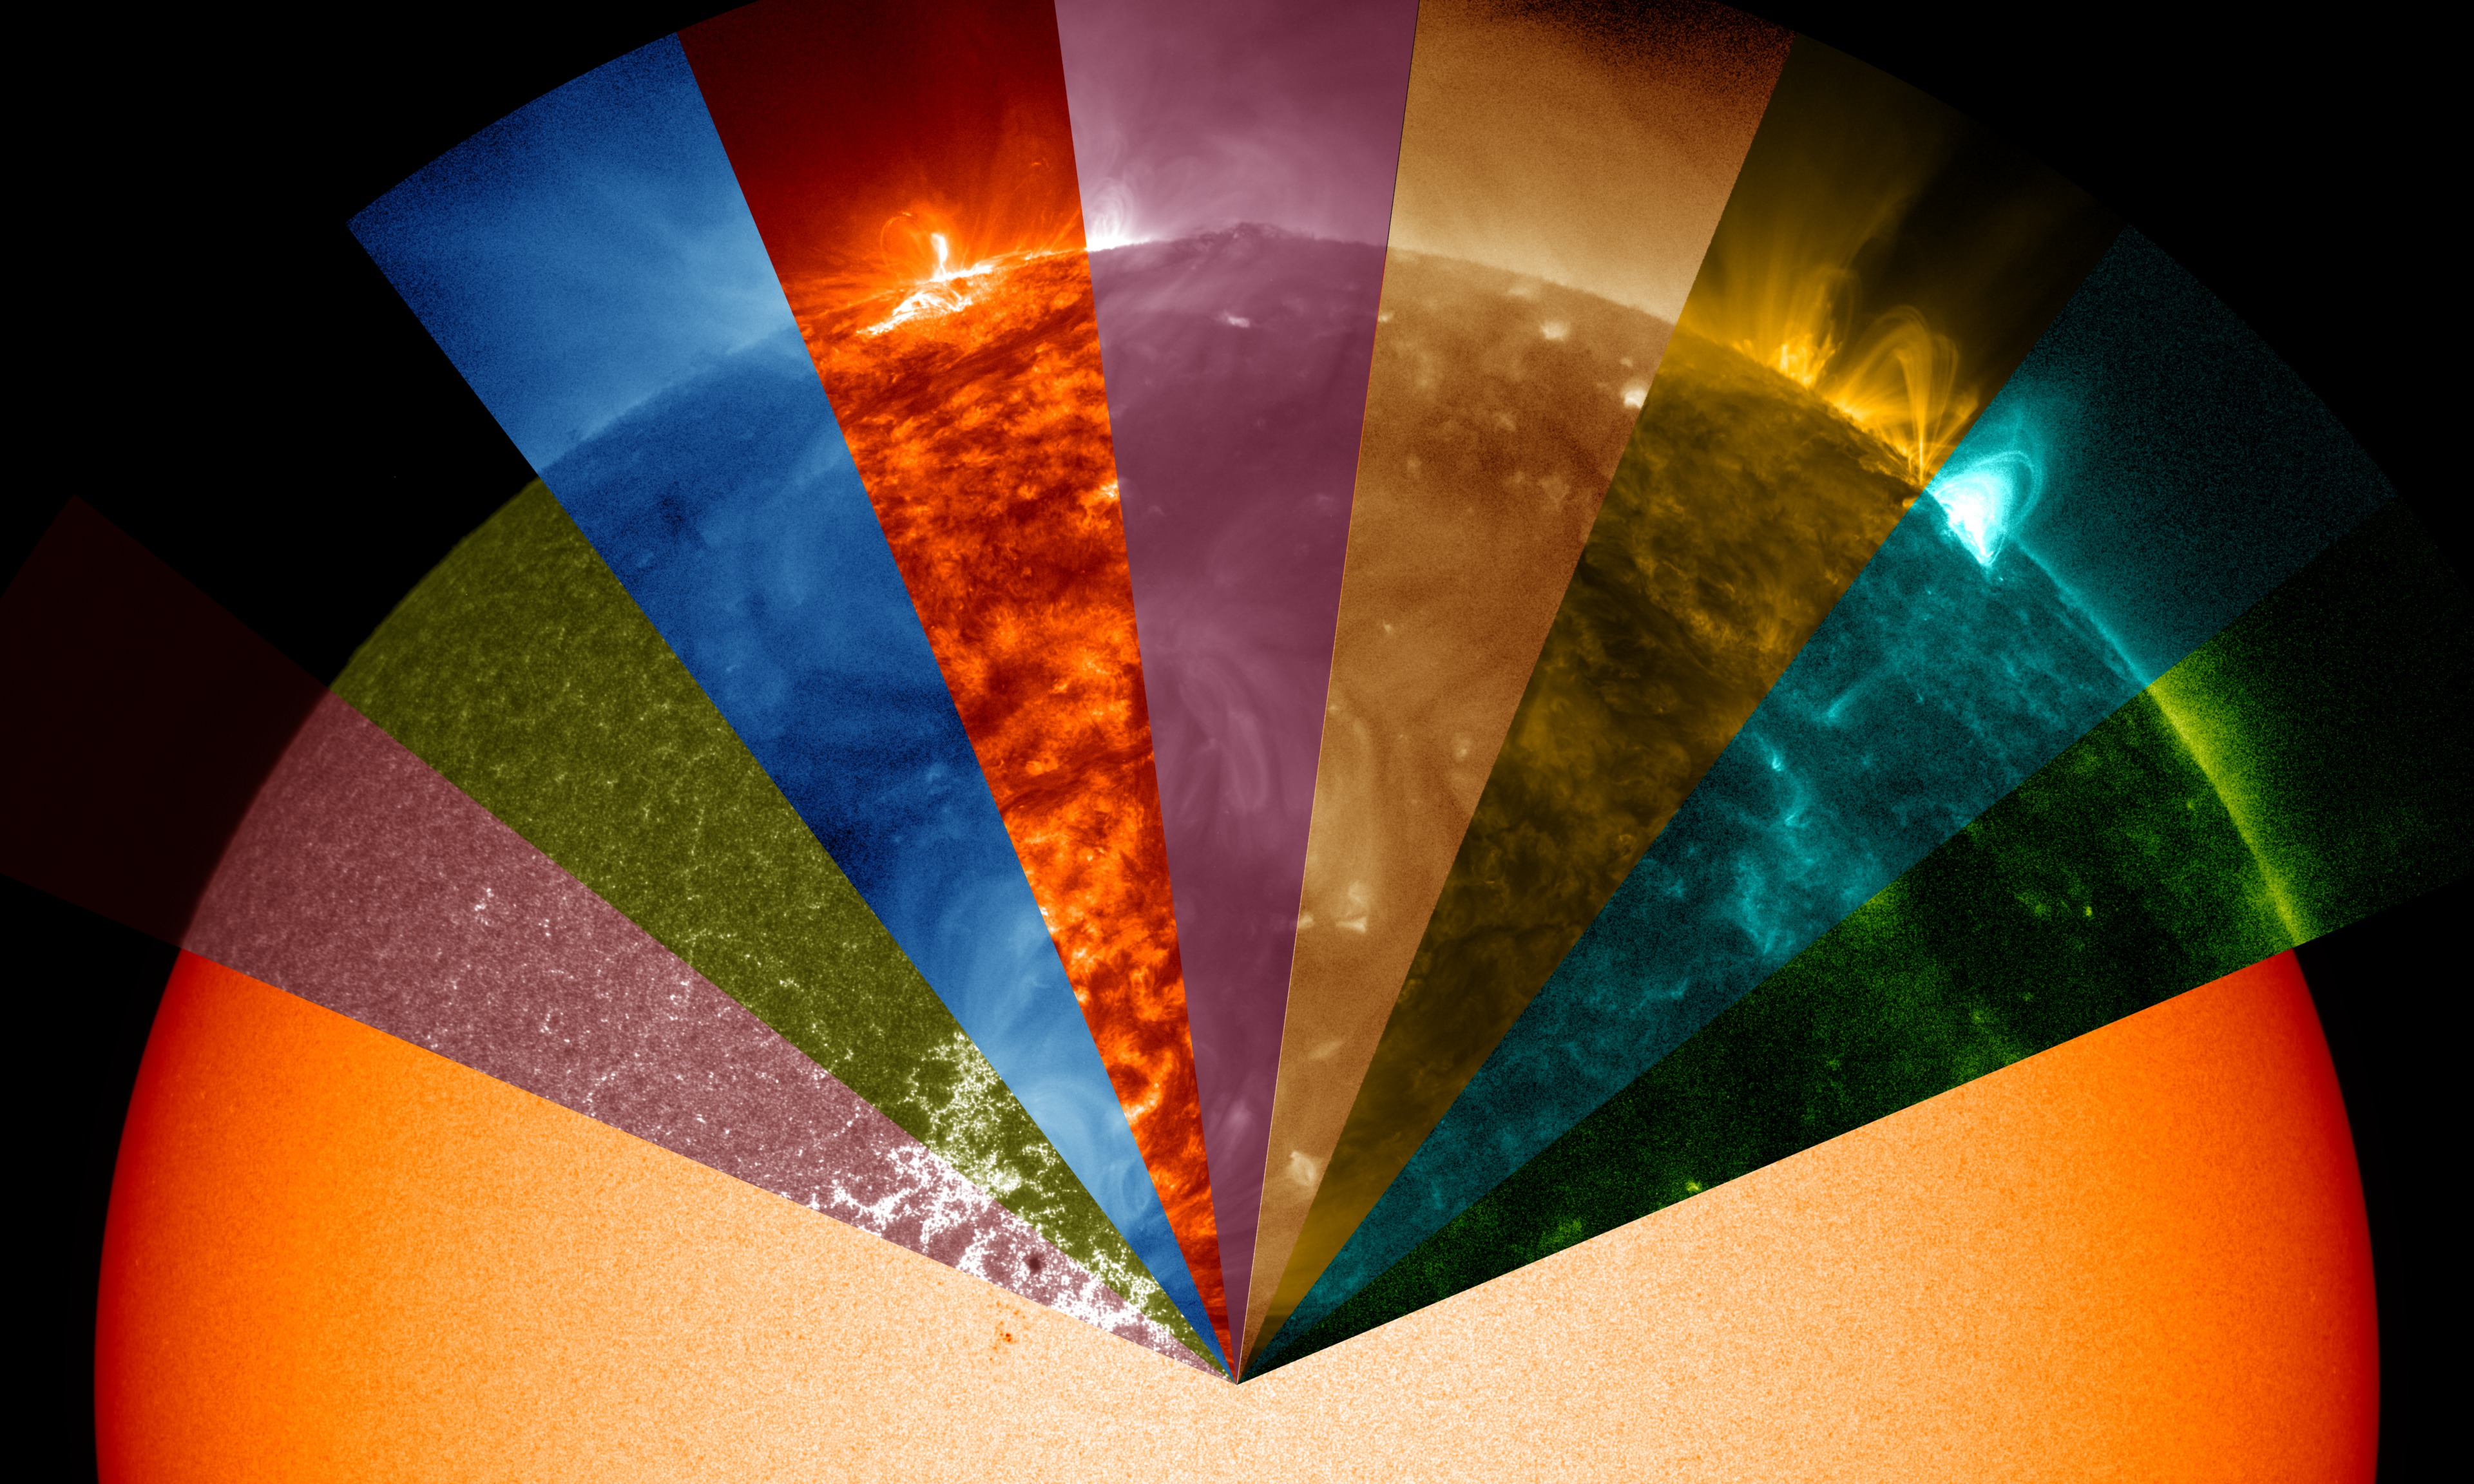 Pie slice view showing the Sun 10 different wavelengths of life. It appears as a colorful rainbow spectrum.